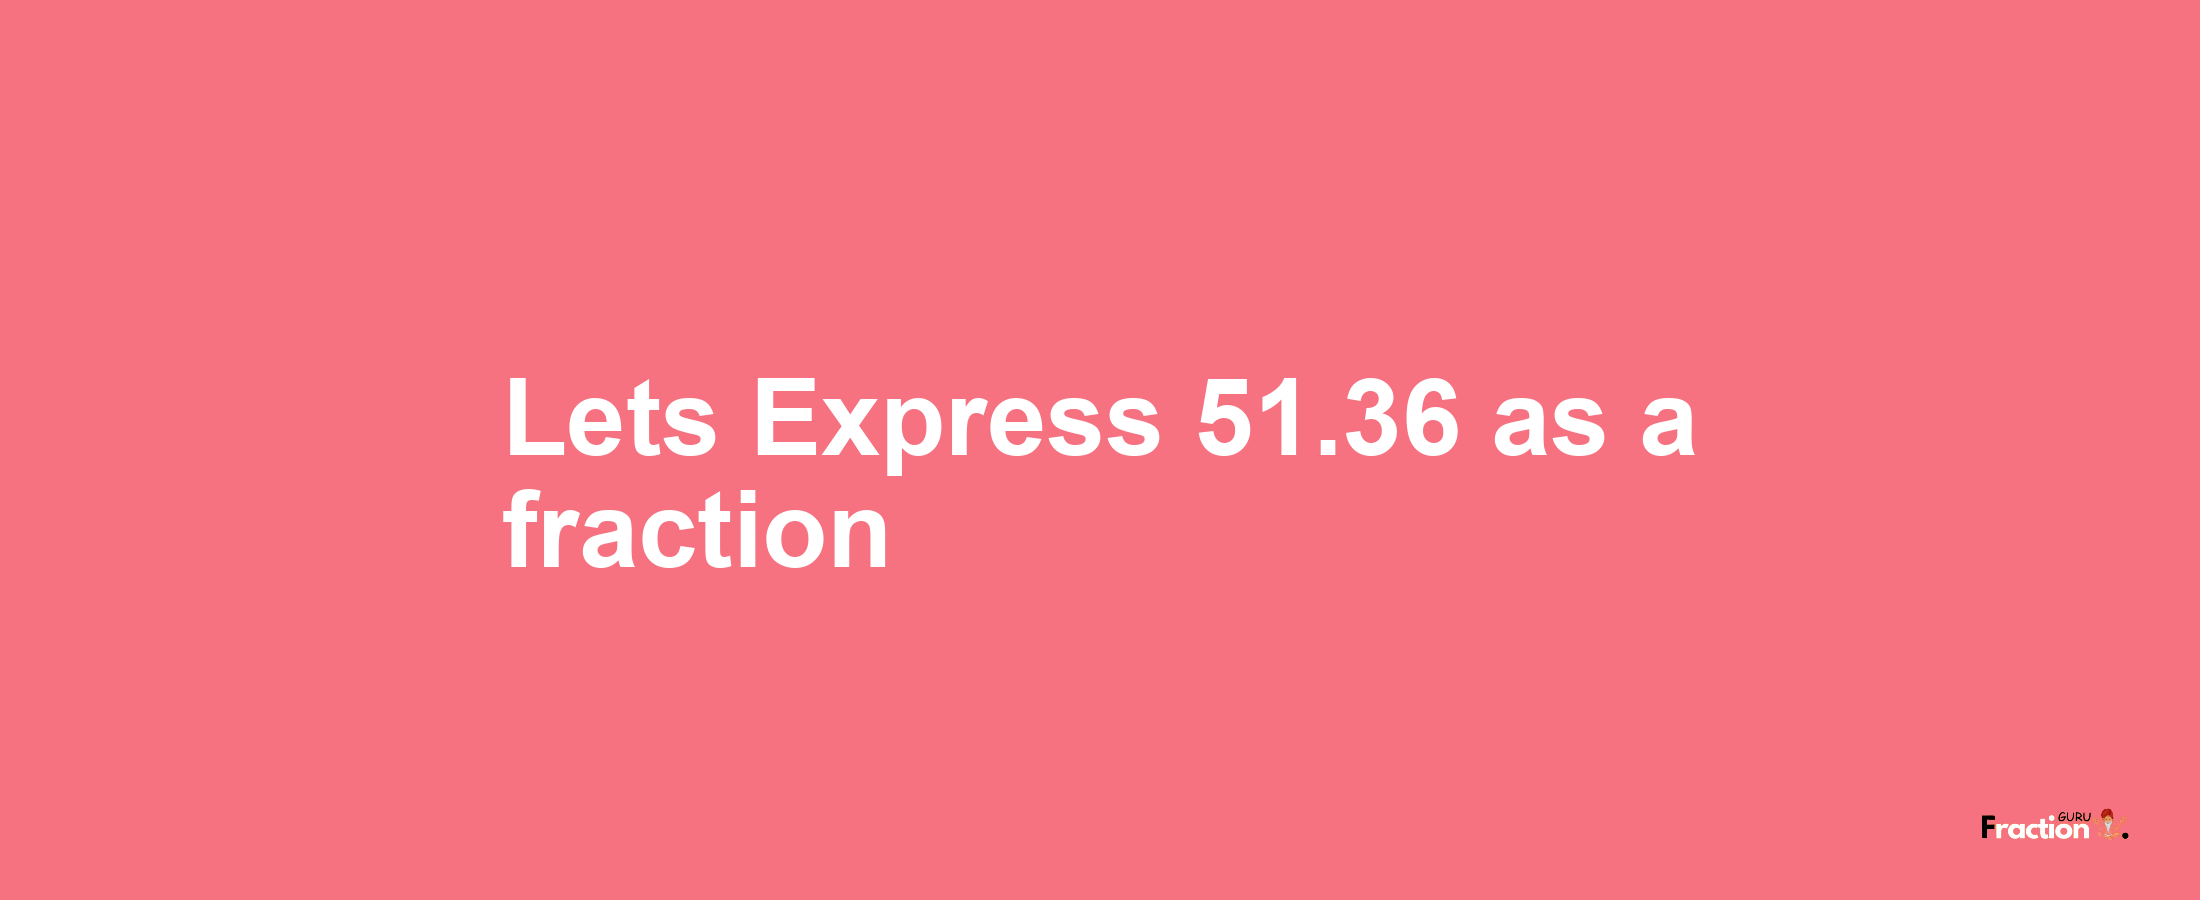 Lets Express 51.36 as afraction